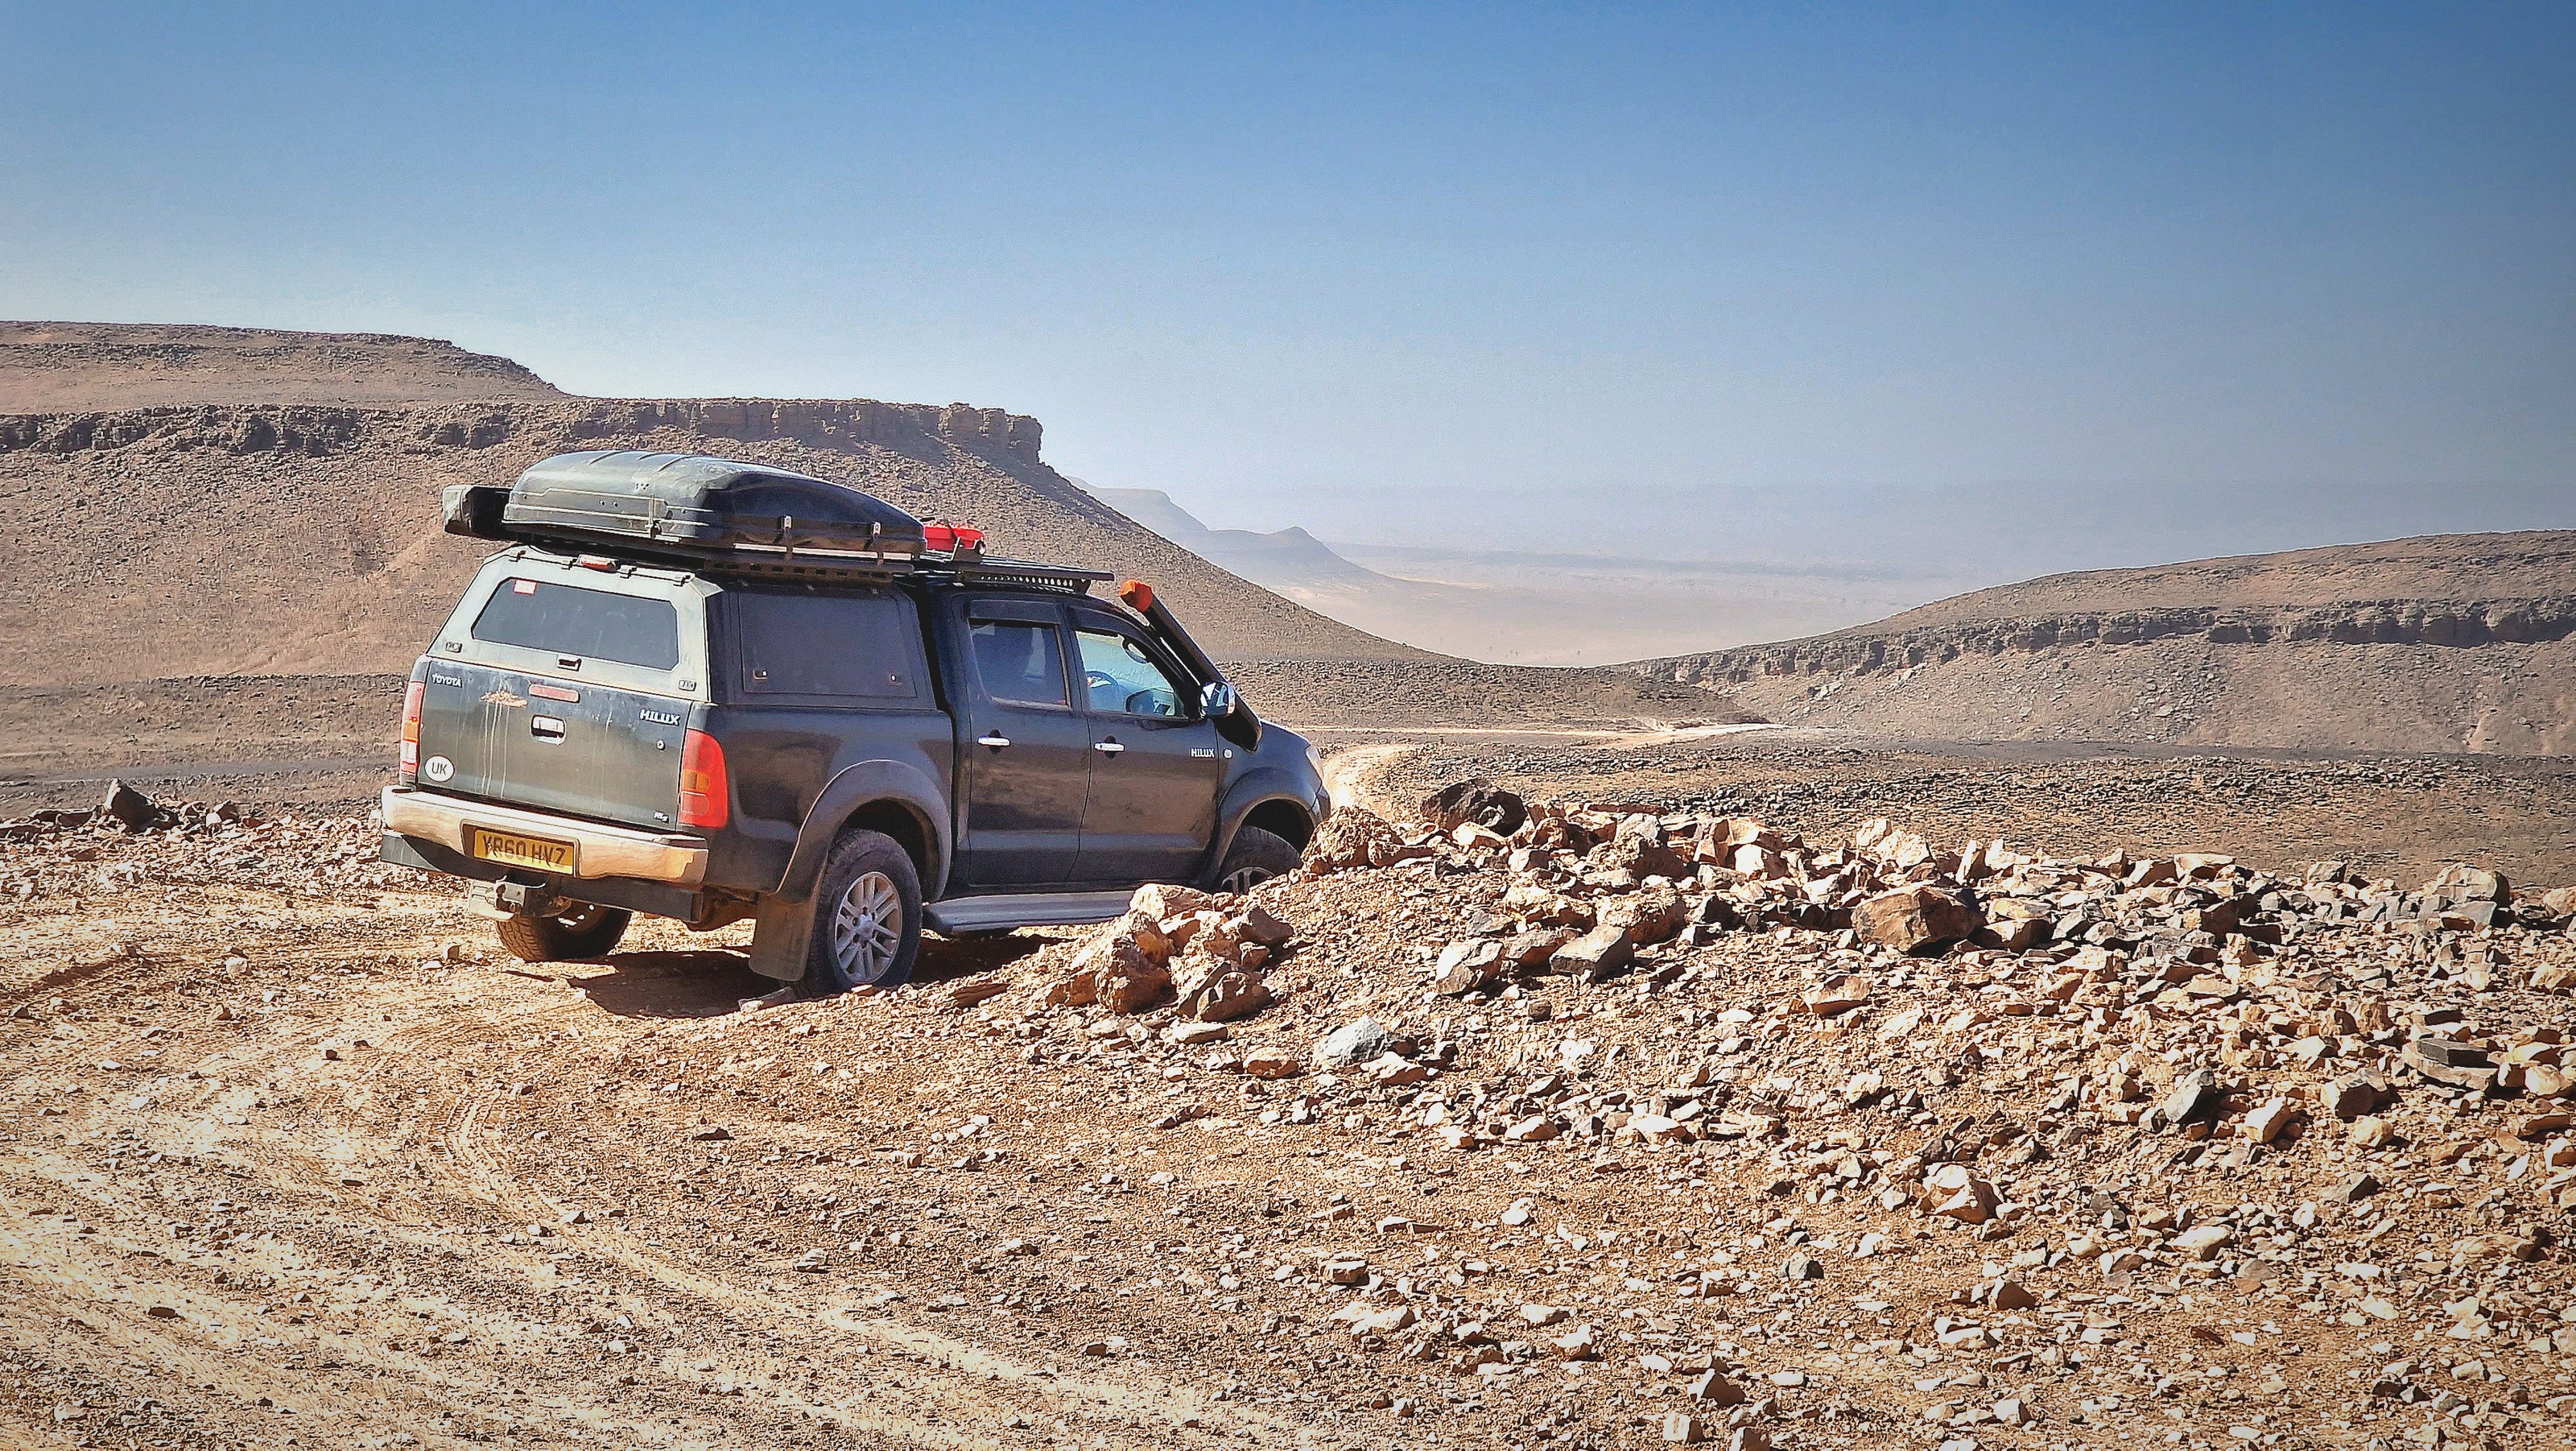 Photo of an expedition overland pickup truck off-roading in a pebbly hot Moroccan desert.